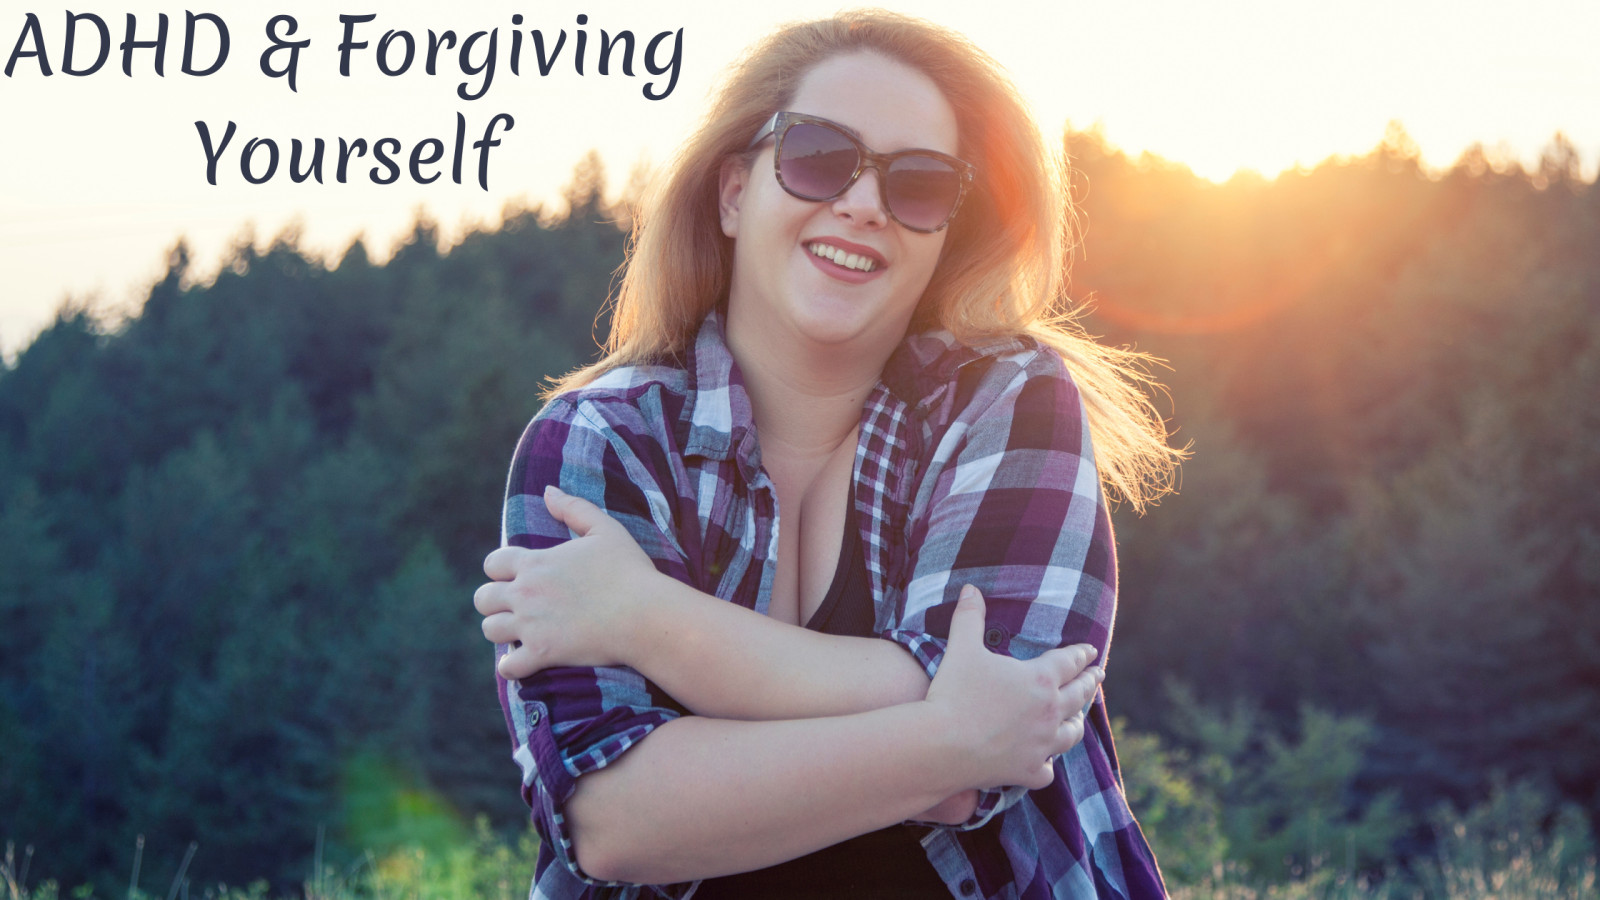 ADHD & Forgiving Yourself